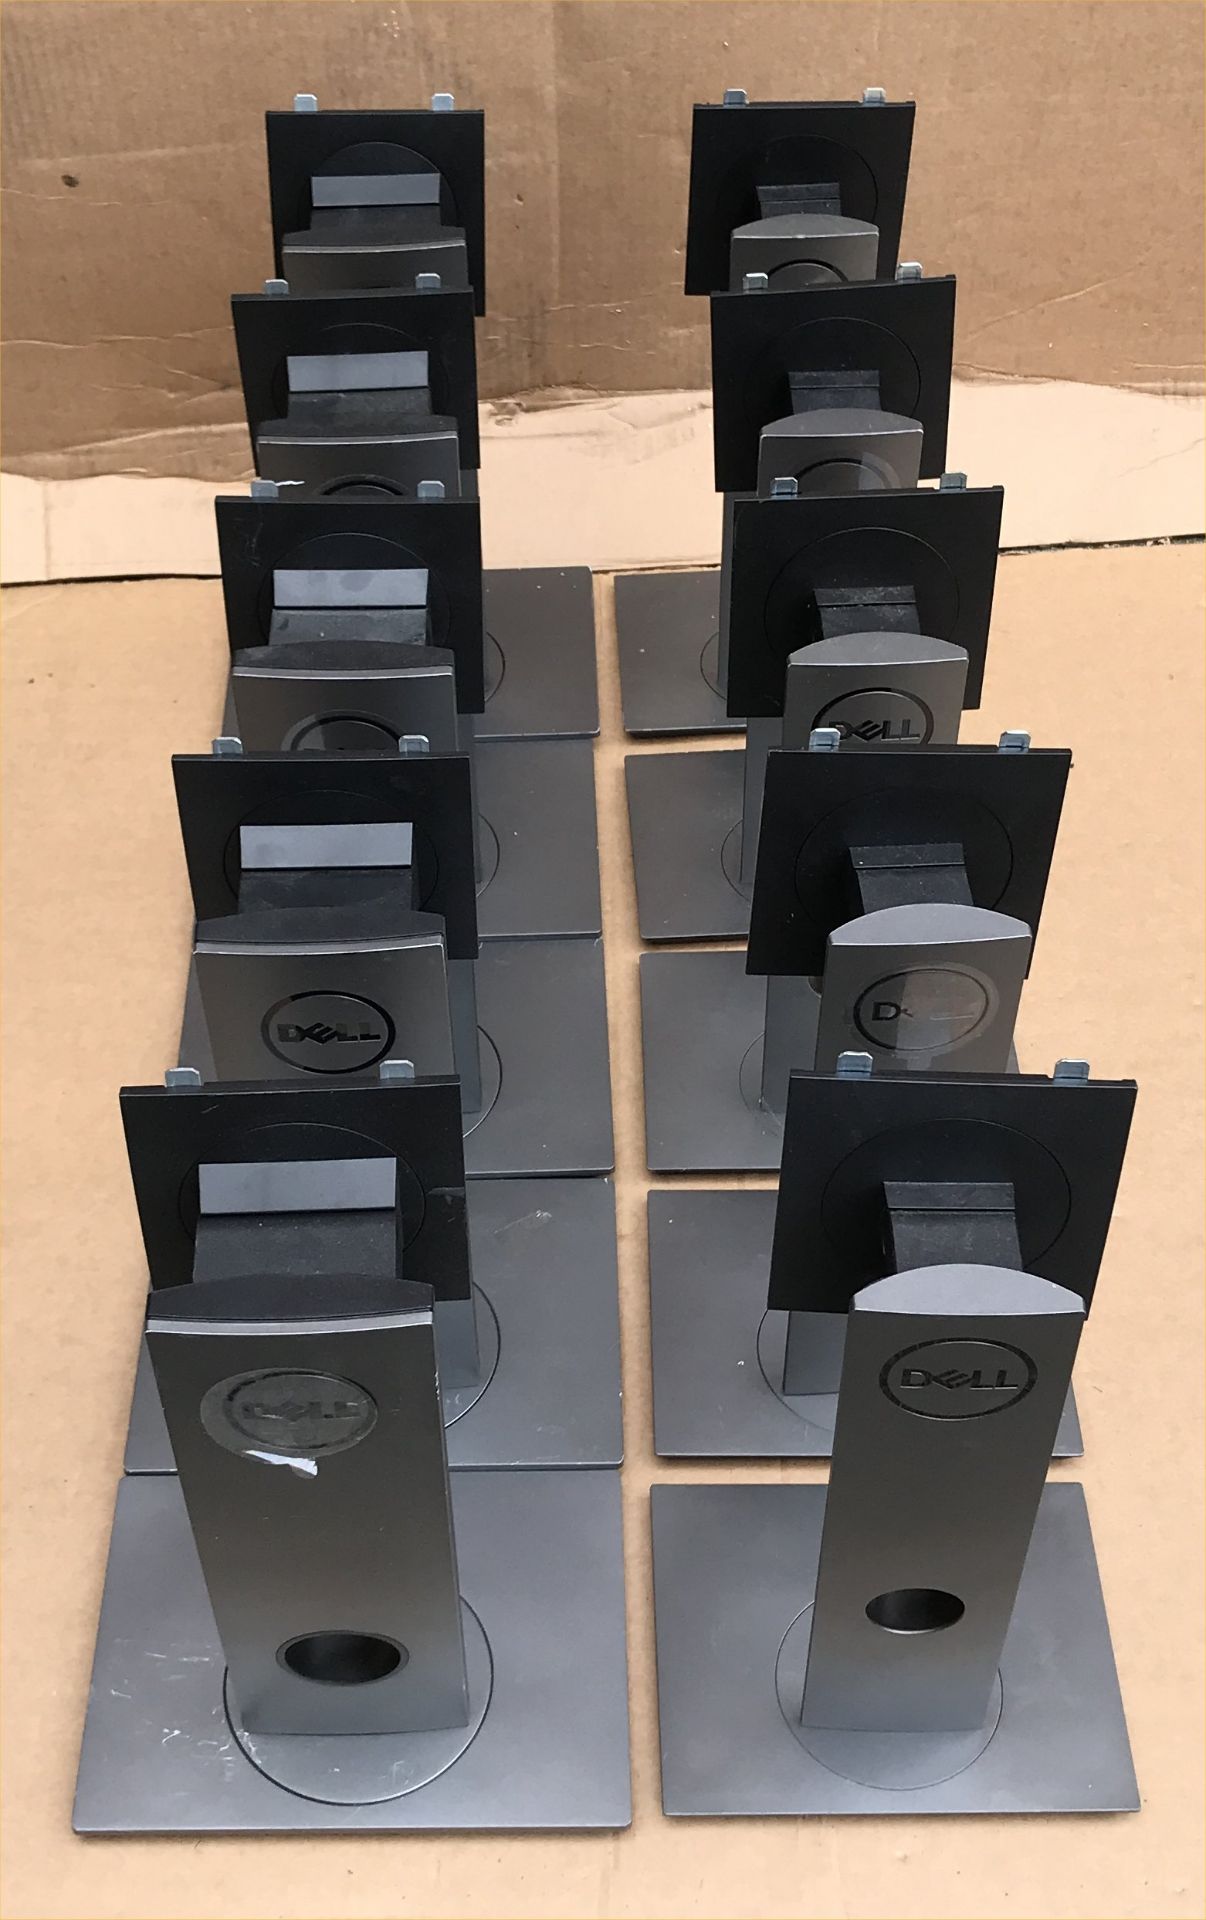 10 X DELL MONITOR STANDS - HEIGHT, TILT, SWIVEL & ROTATE ADJUSTABLE - Image 2 of 3